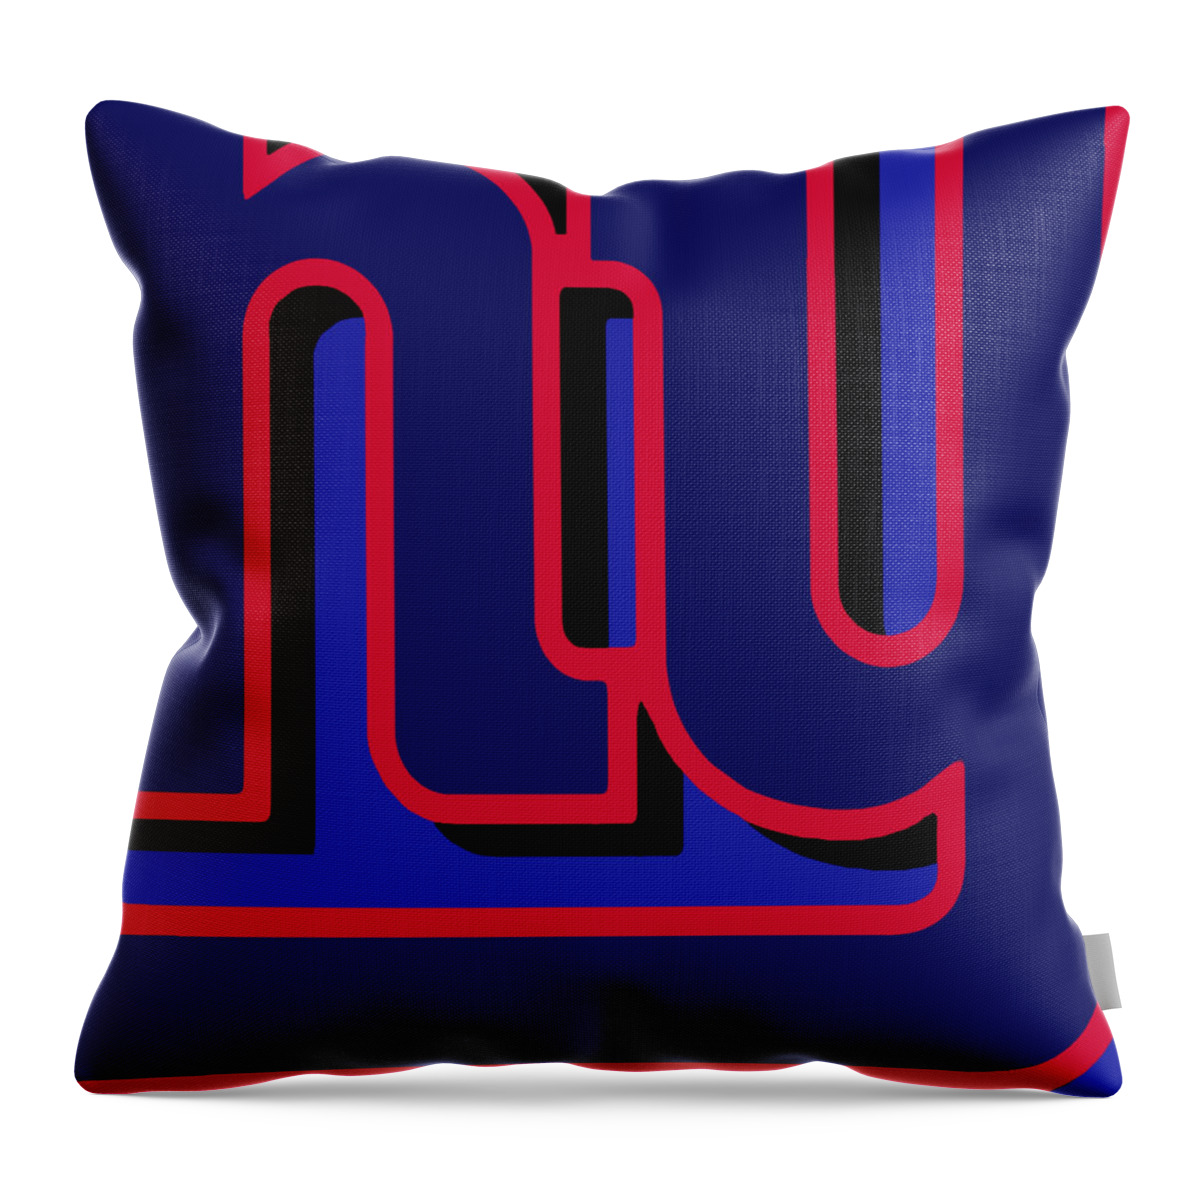 New York Throw Pillow featuring the painting New York Giants Football by Tony Rubino